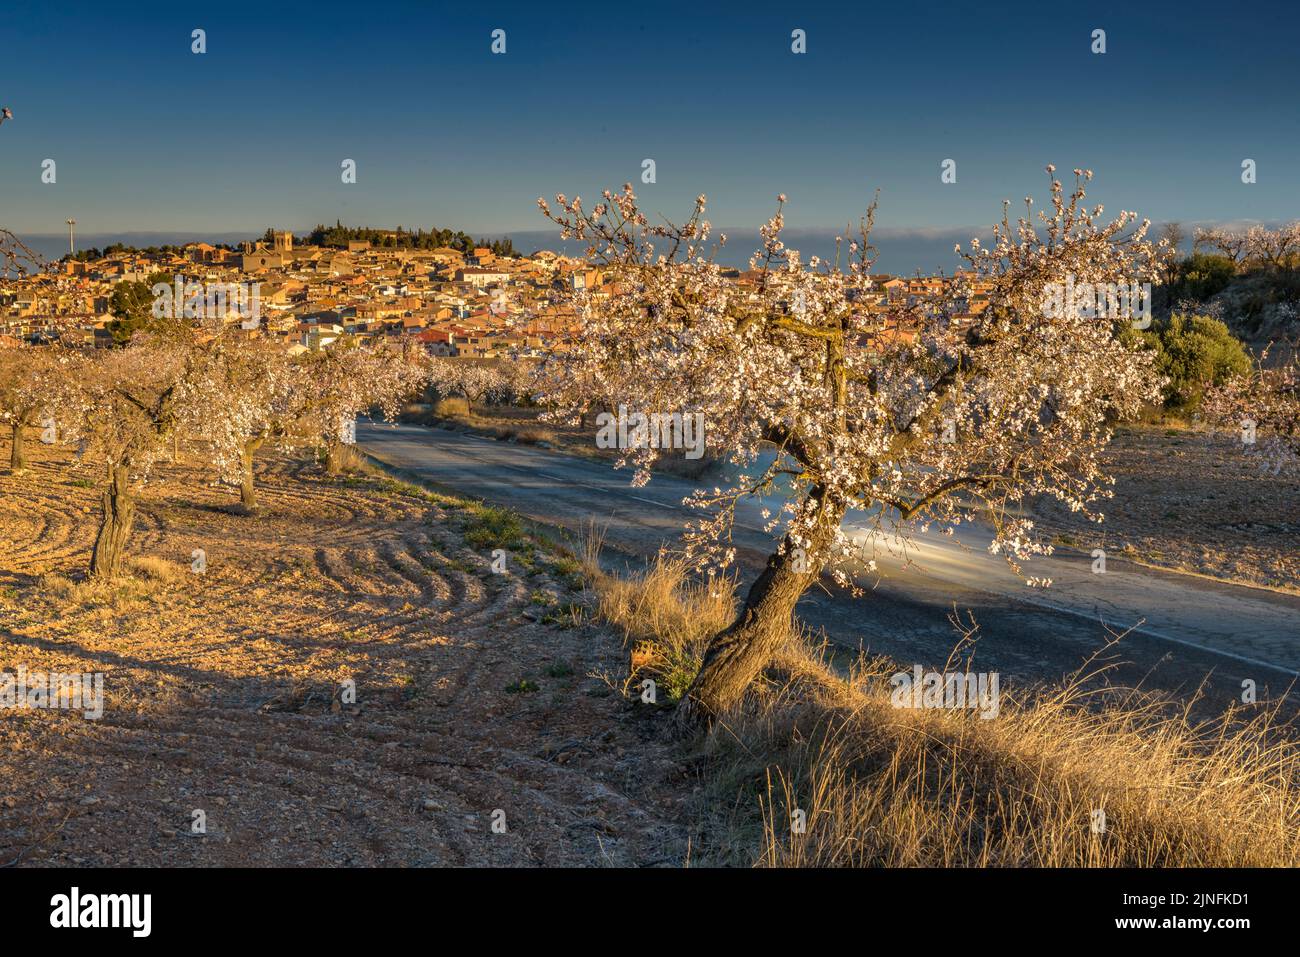 Sunrise over fields of almond trees blooming around the town of Arbeca (Les Garrigues, Lleida, Catalonia, Spain)  ESP: Amanecer en almendros de Arbeca Stock Photo